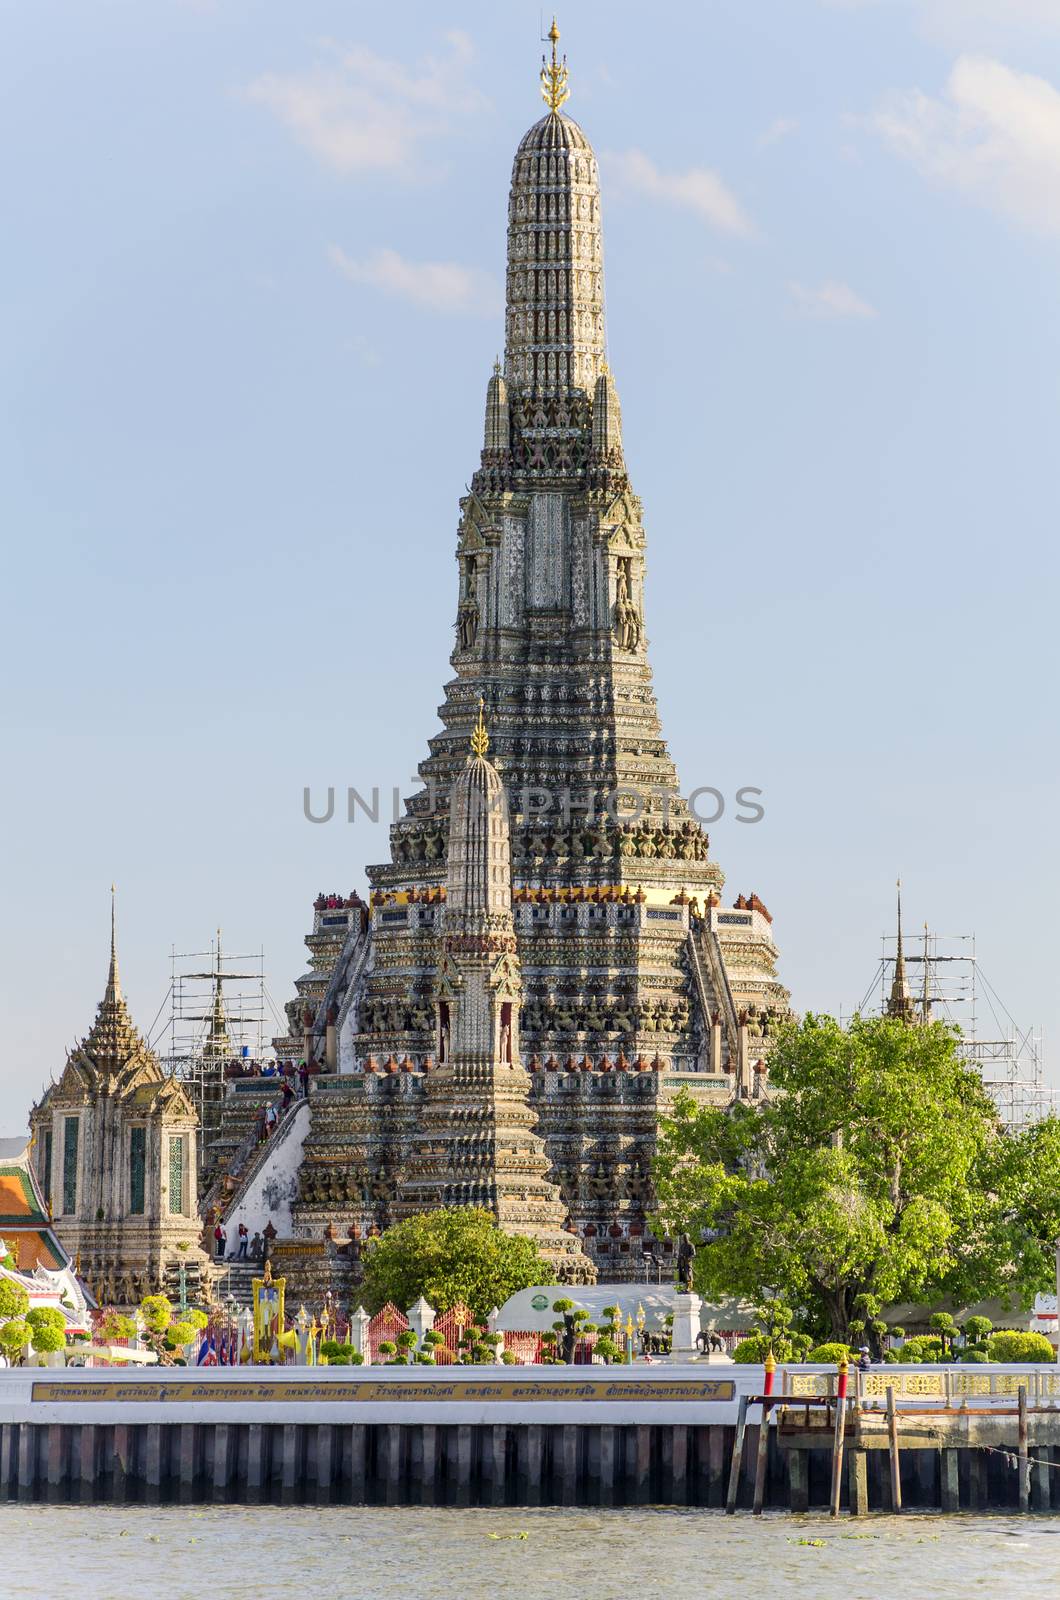 BANGKOK - JULY 3: View of Wat arun temple from ferry boat on chao phra river, Wat Arun is a Buddhist temple (wat) in Bangkok Yai district of Bangkok. July 3, 2014 in Bangkok,Thailand